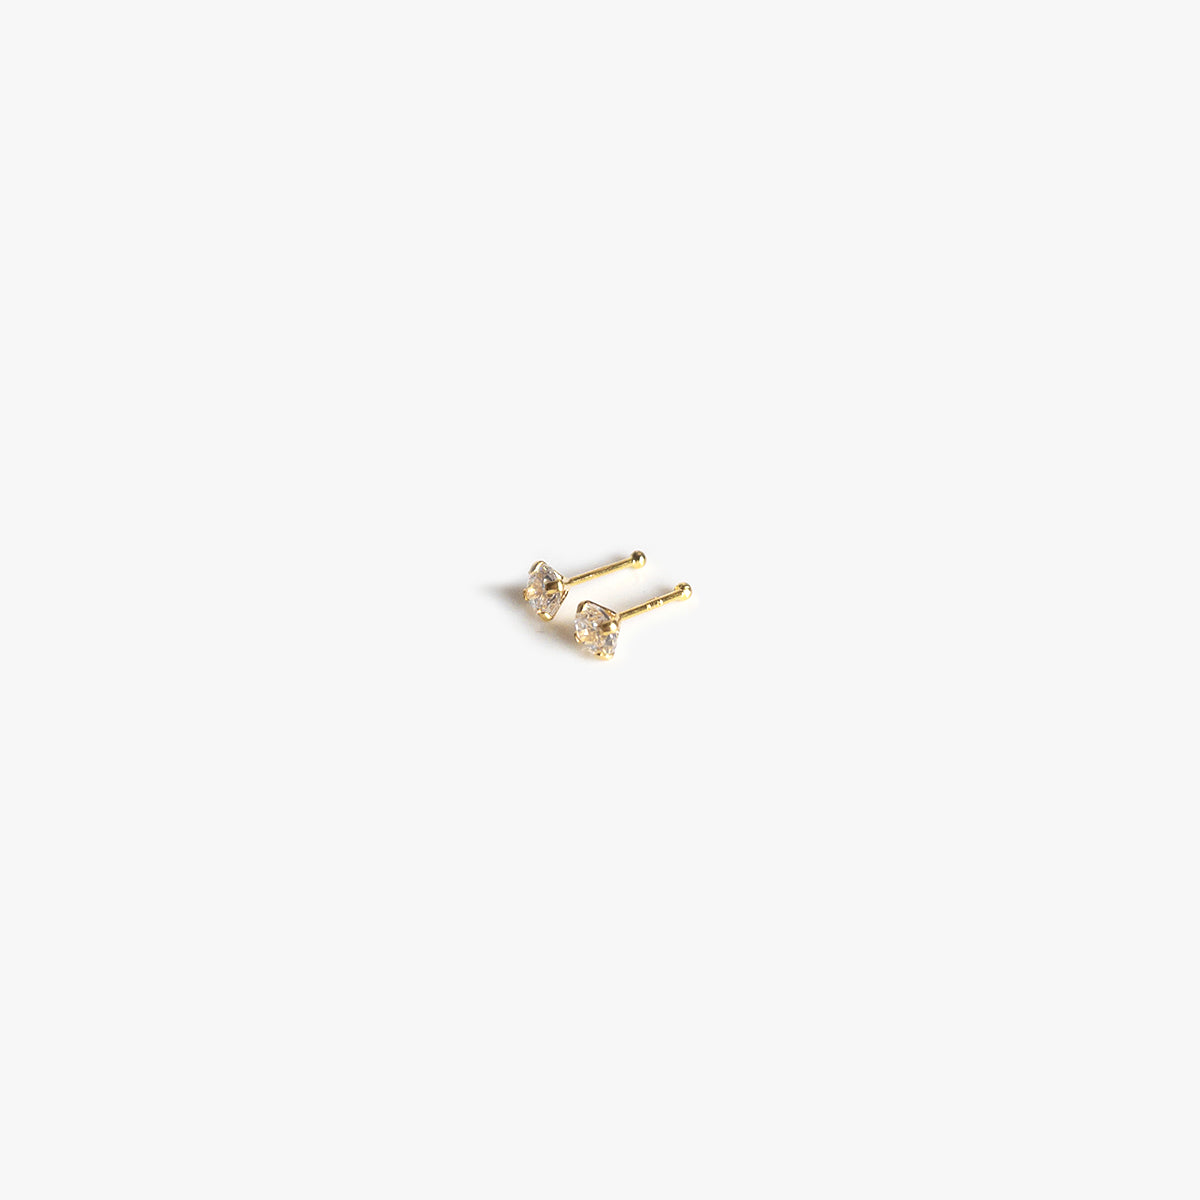 The Solitaire Easy Studs in Solid Gold